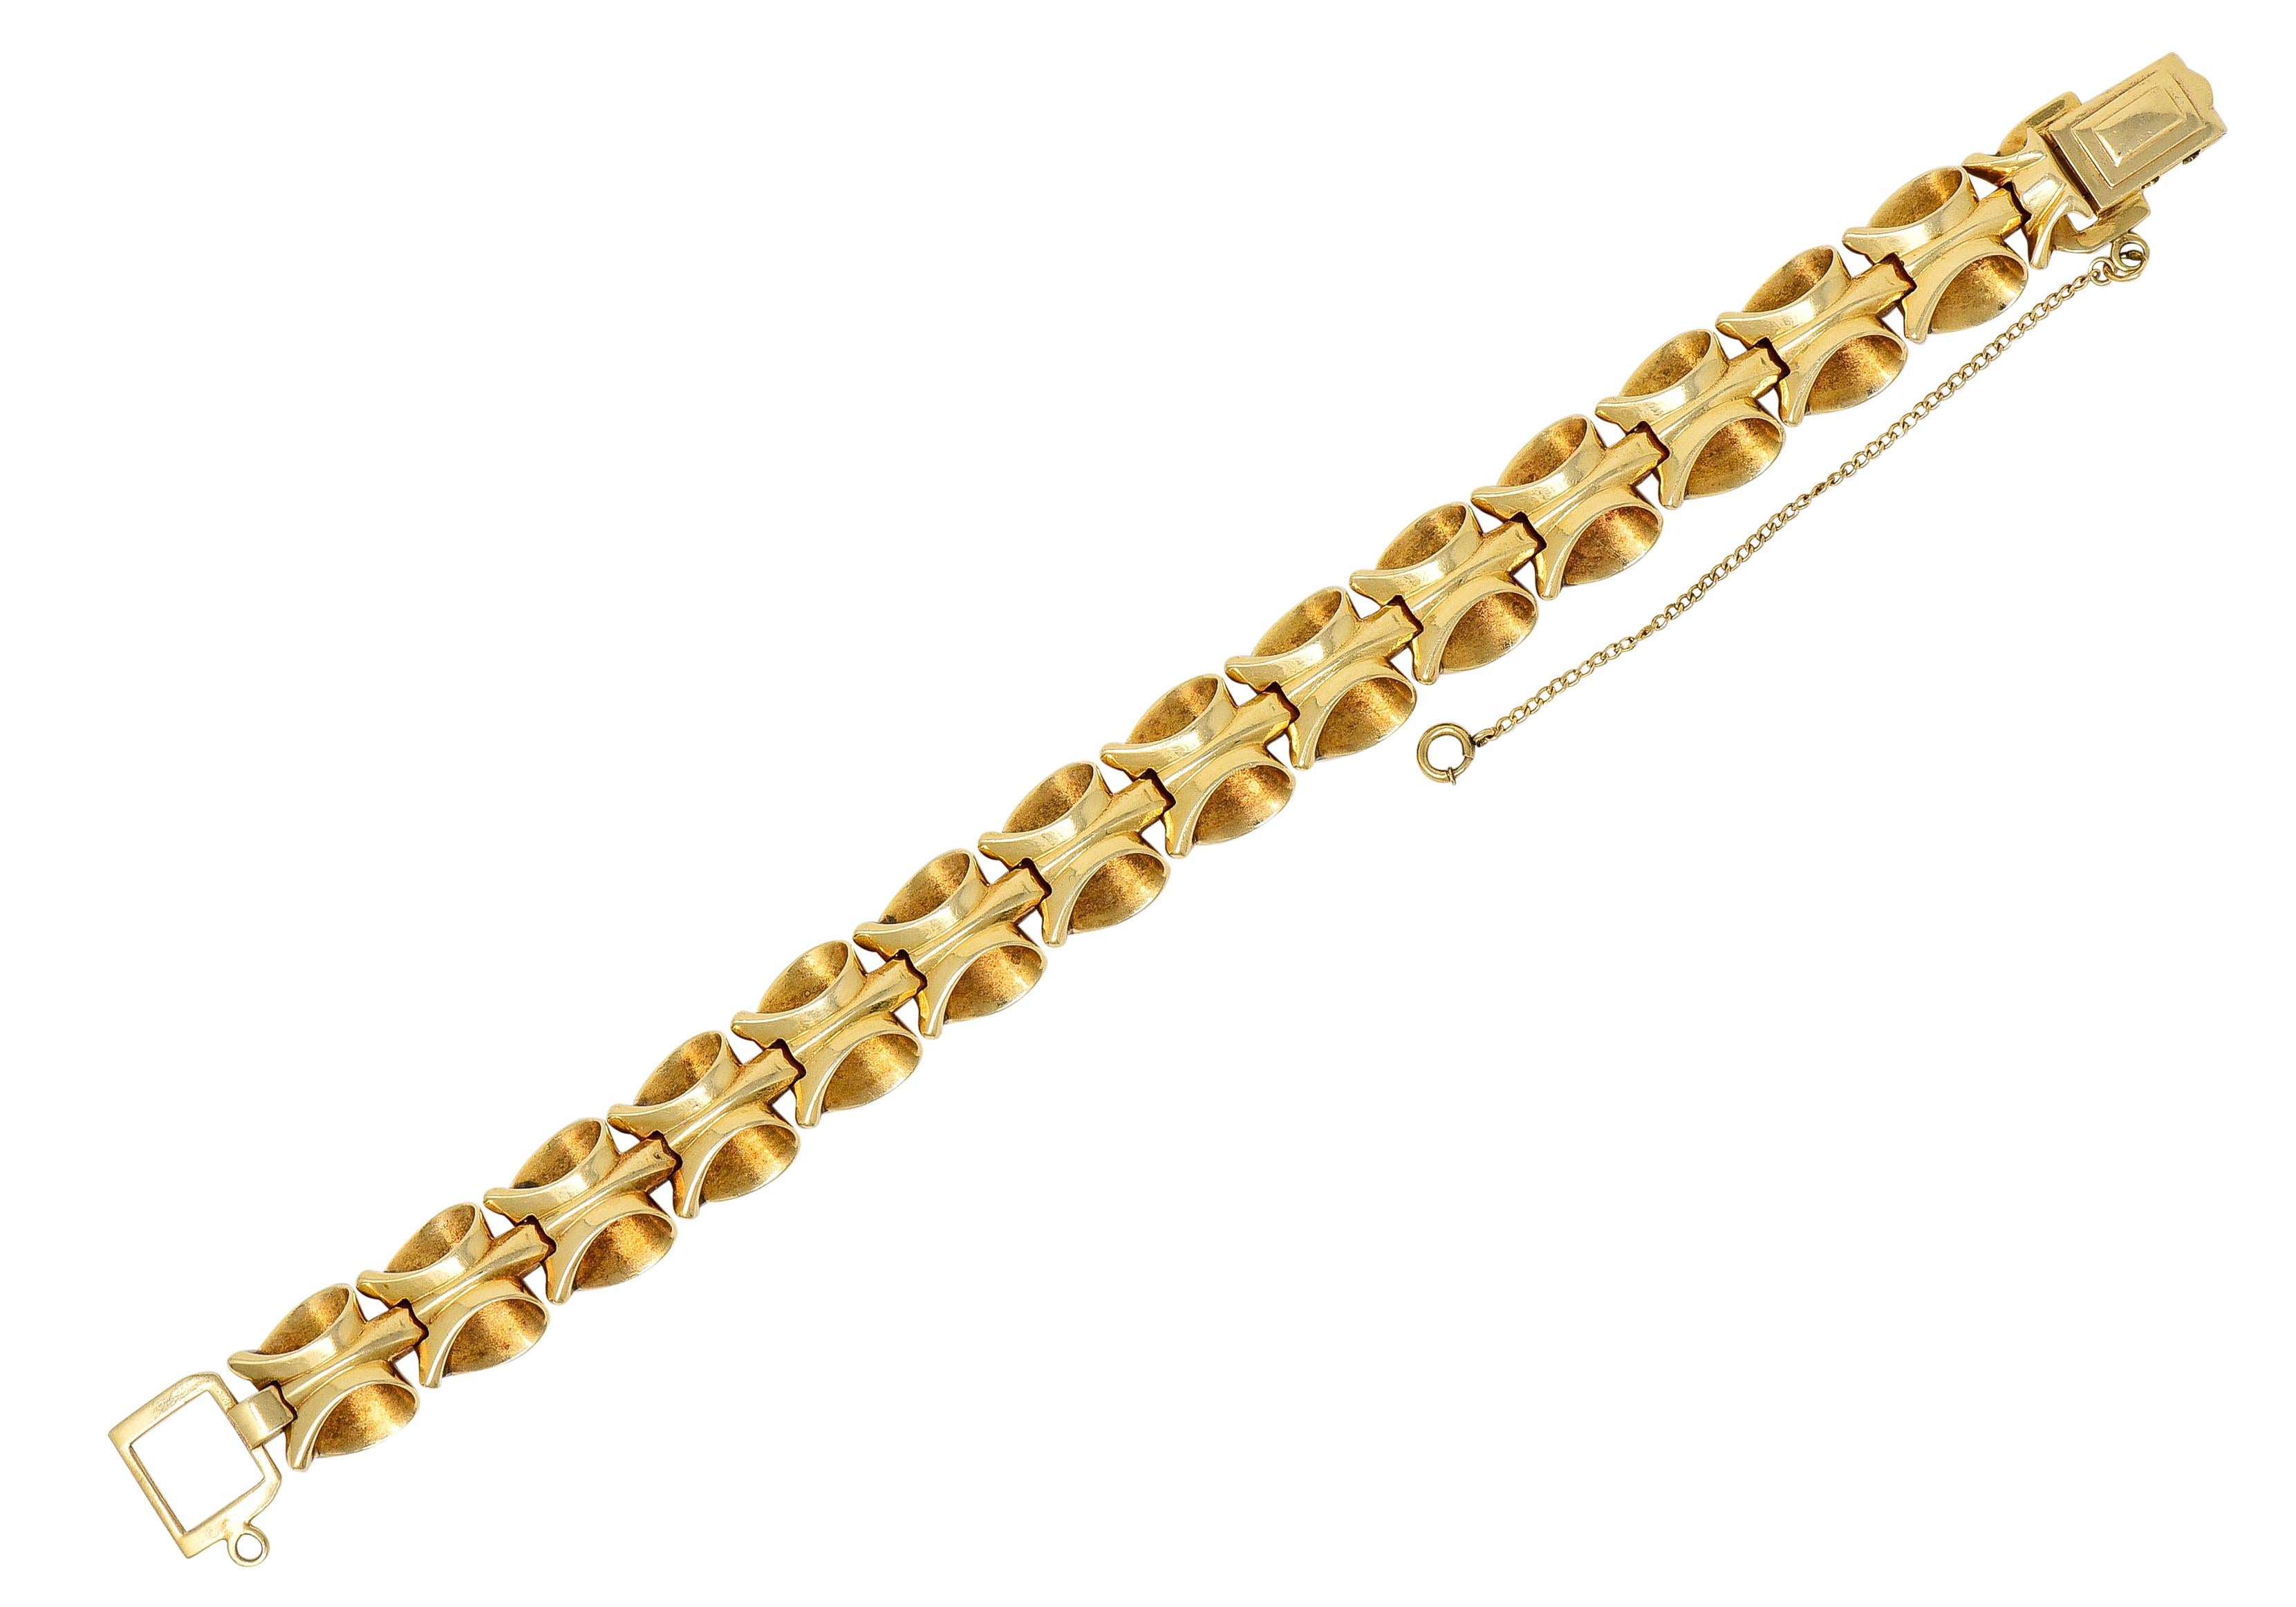 Bracelet is comprised of dynamically formed links as stylized ribbon-like loops

Contrasting a bright finish with inner brushed finish

Completed by fold-over clasp with chain safety

Stamped 14K for 14 karat gold

Circa: 1940s

Length: adjustable